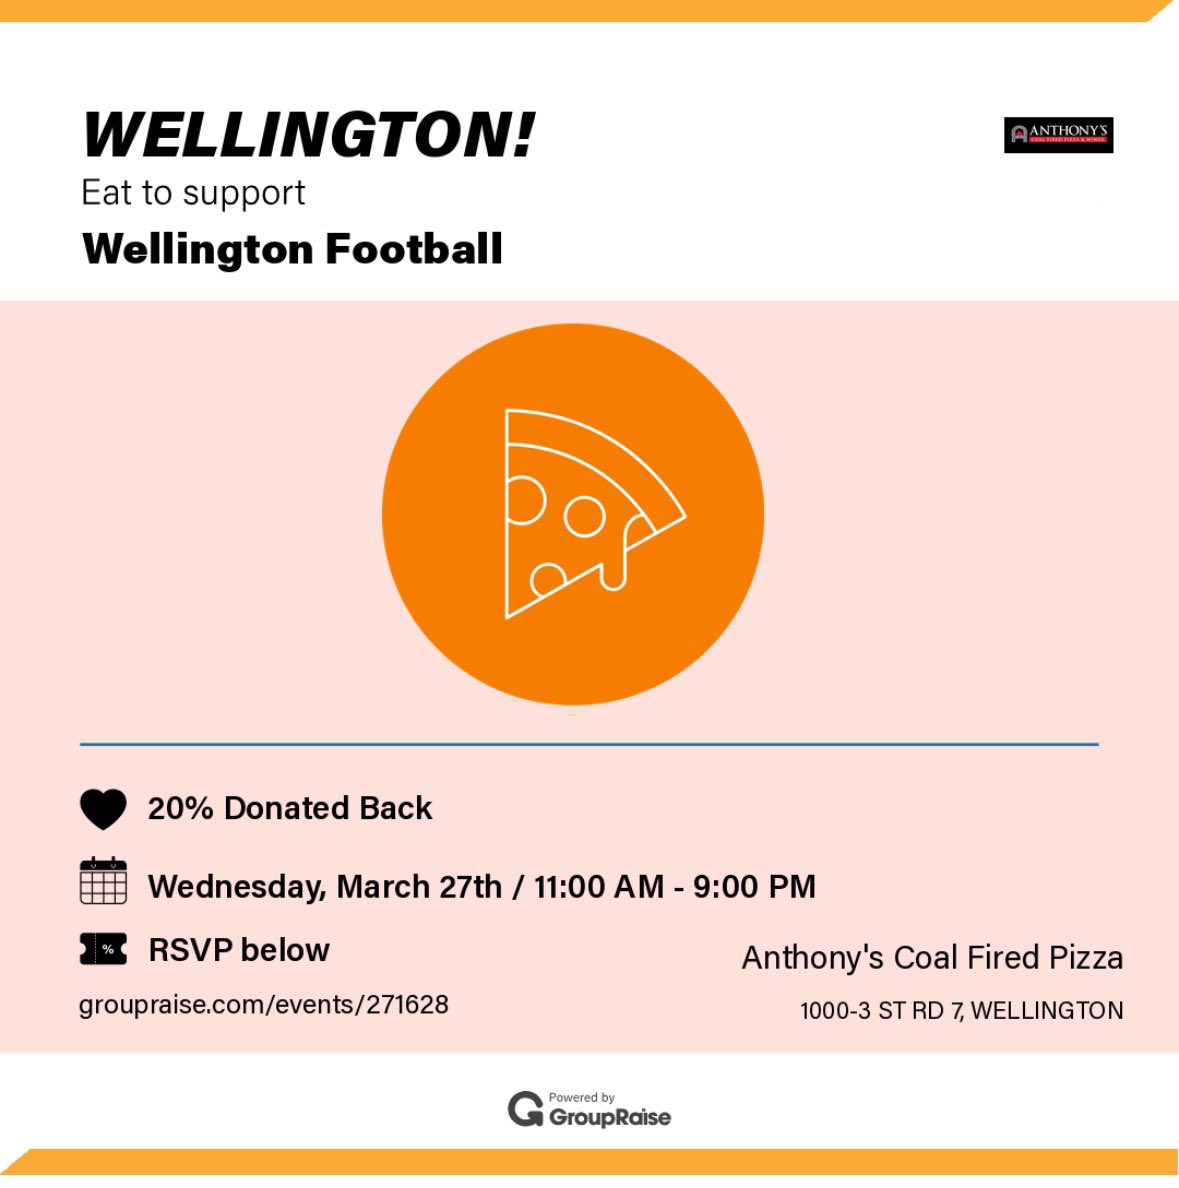 Come out to Anthony’s Coal Fired Pizza today and support the Wellington Football team! Let them know you are with us and we get 20% of all proceeds.